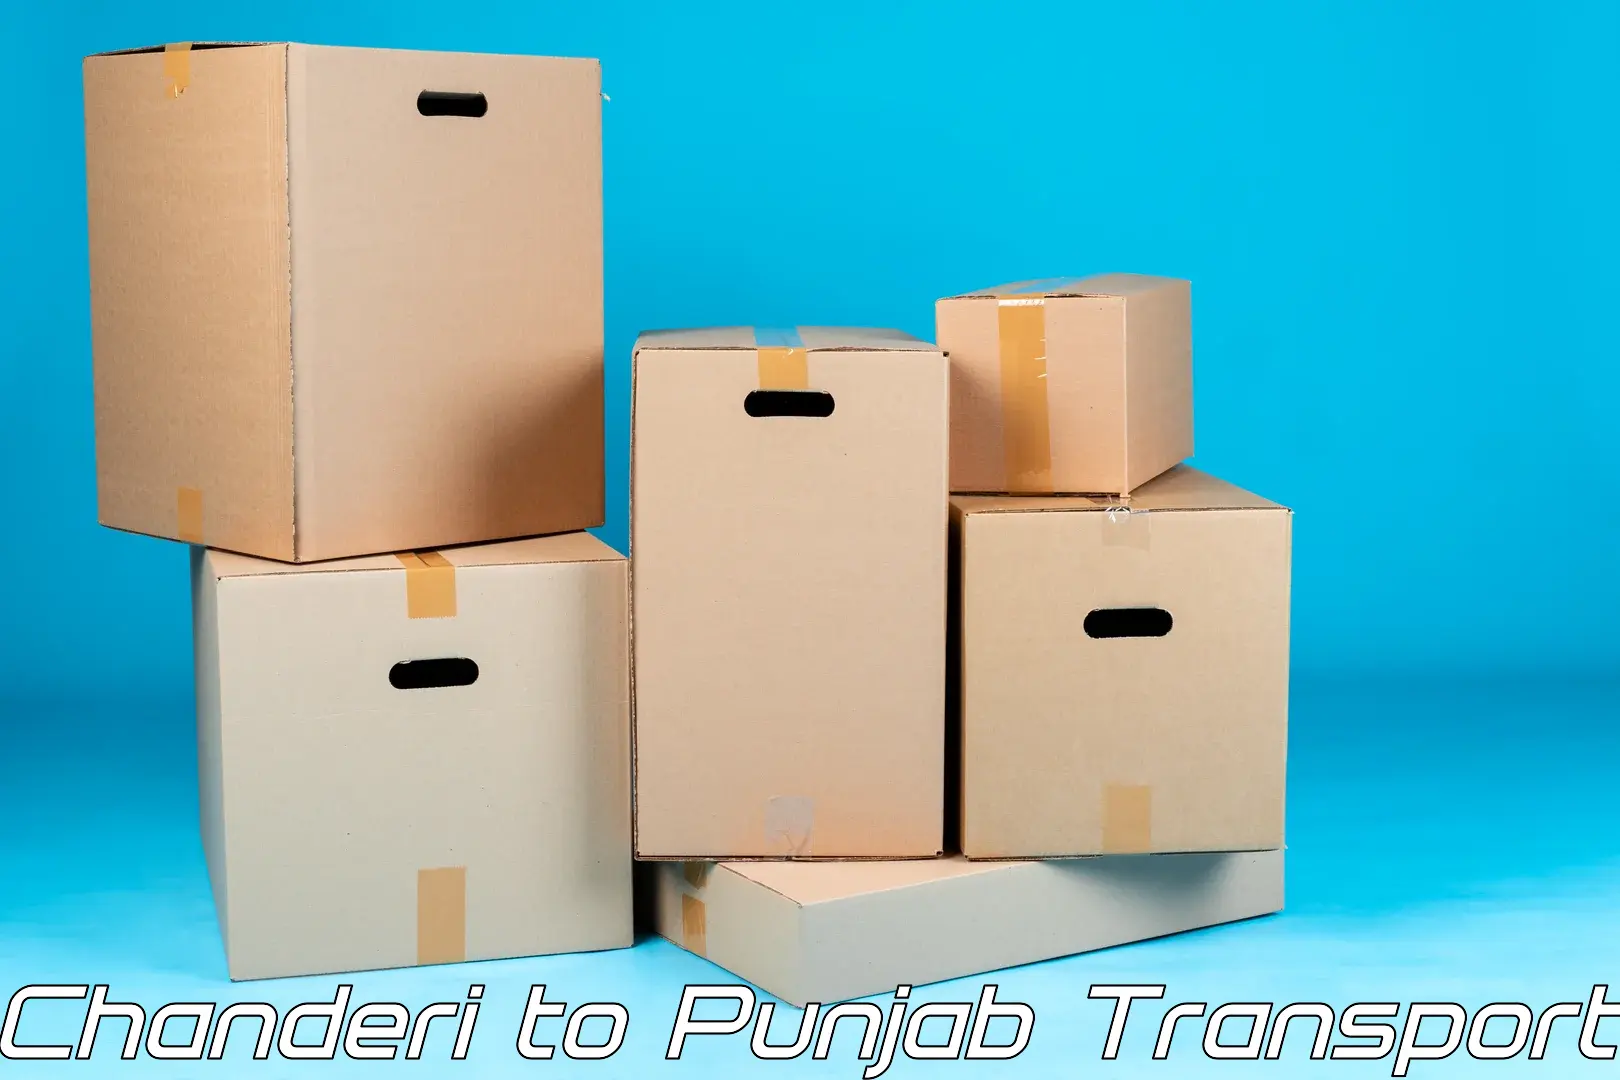 Truck transport companies in India Chanderi to Amritsar